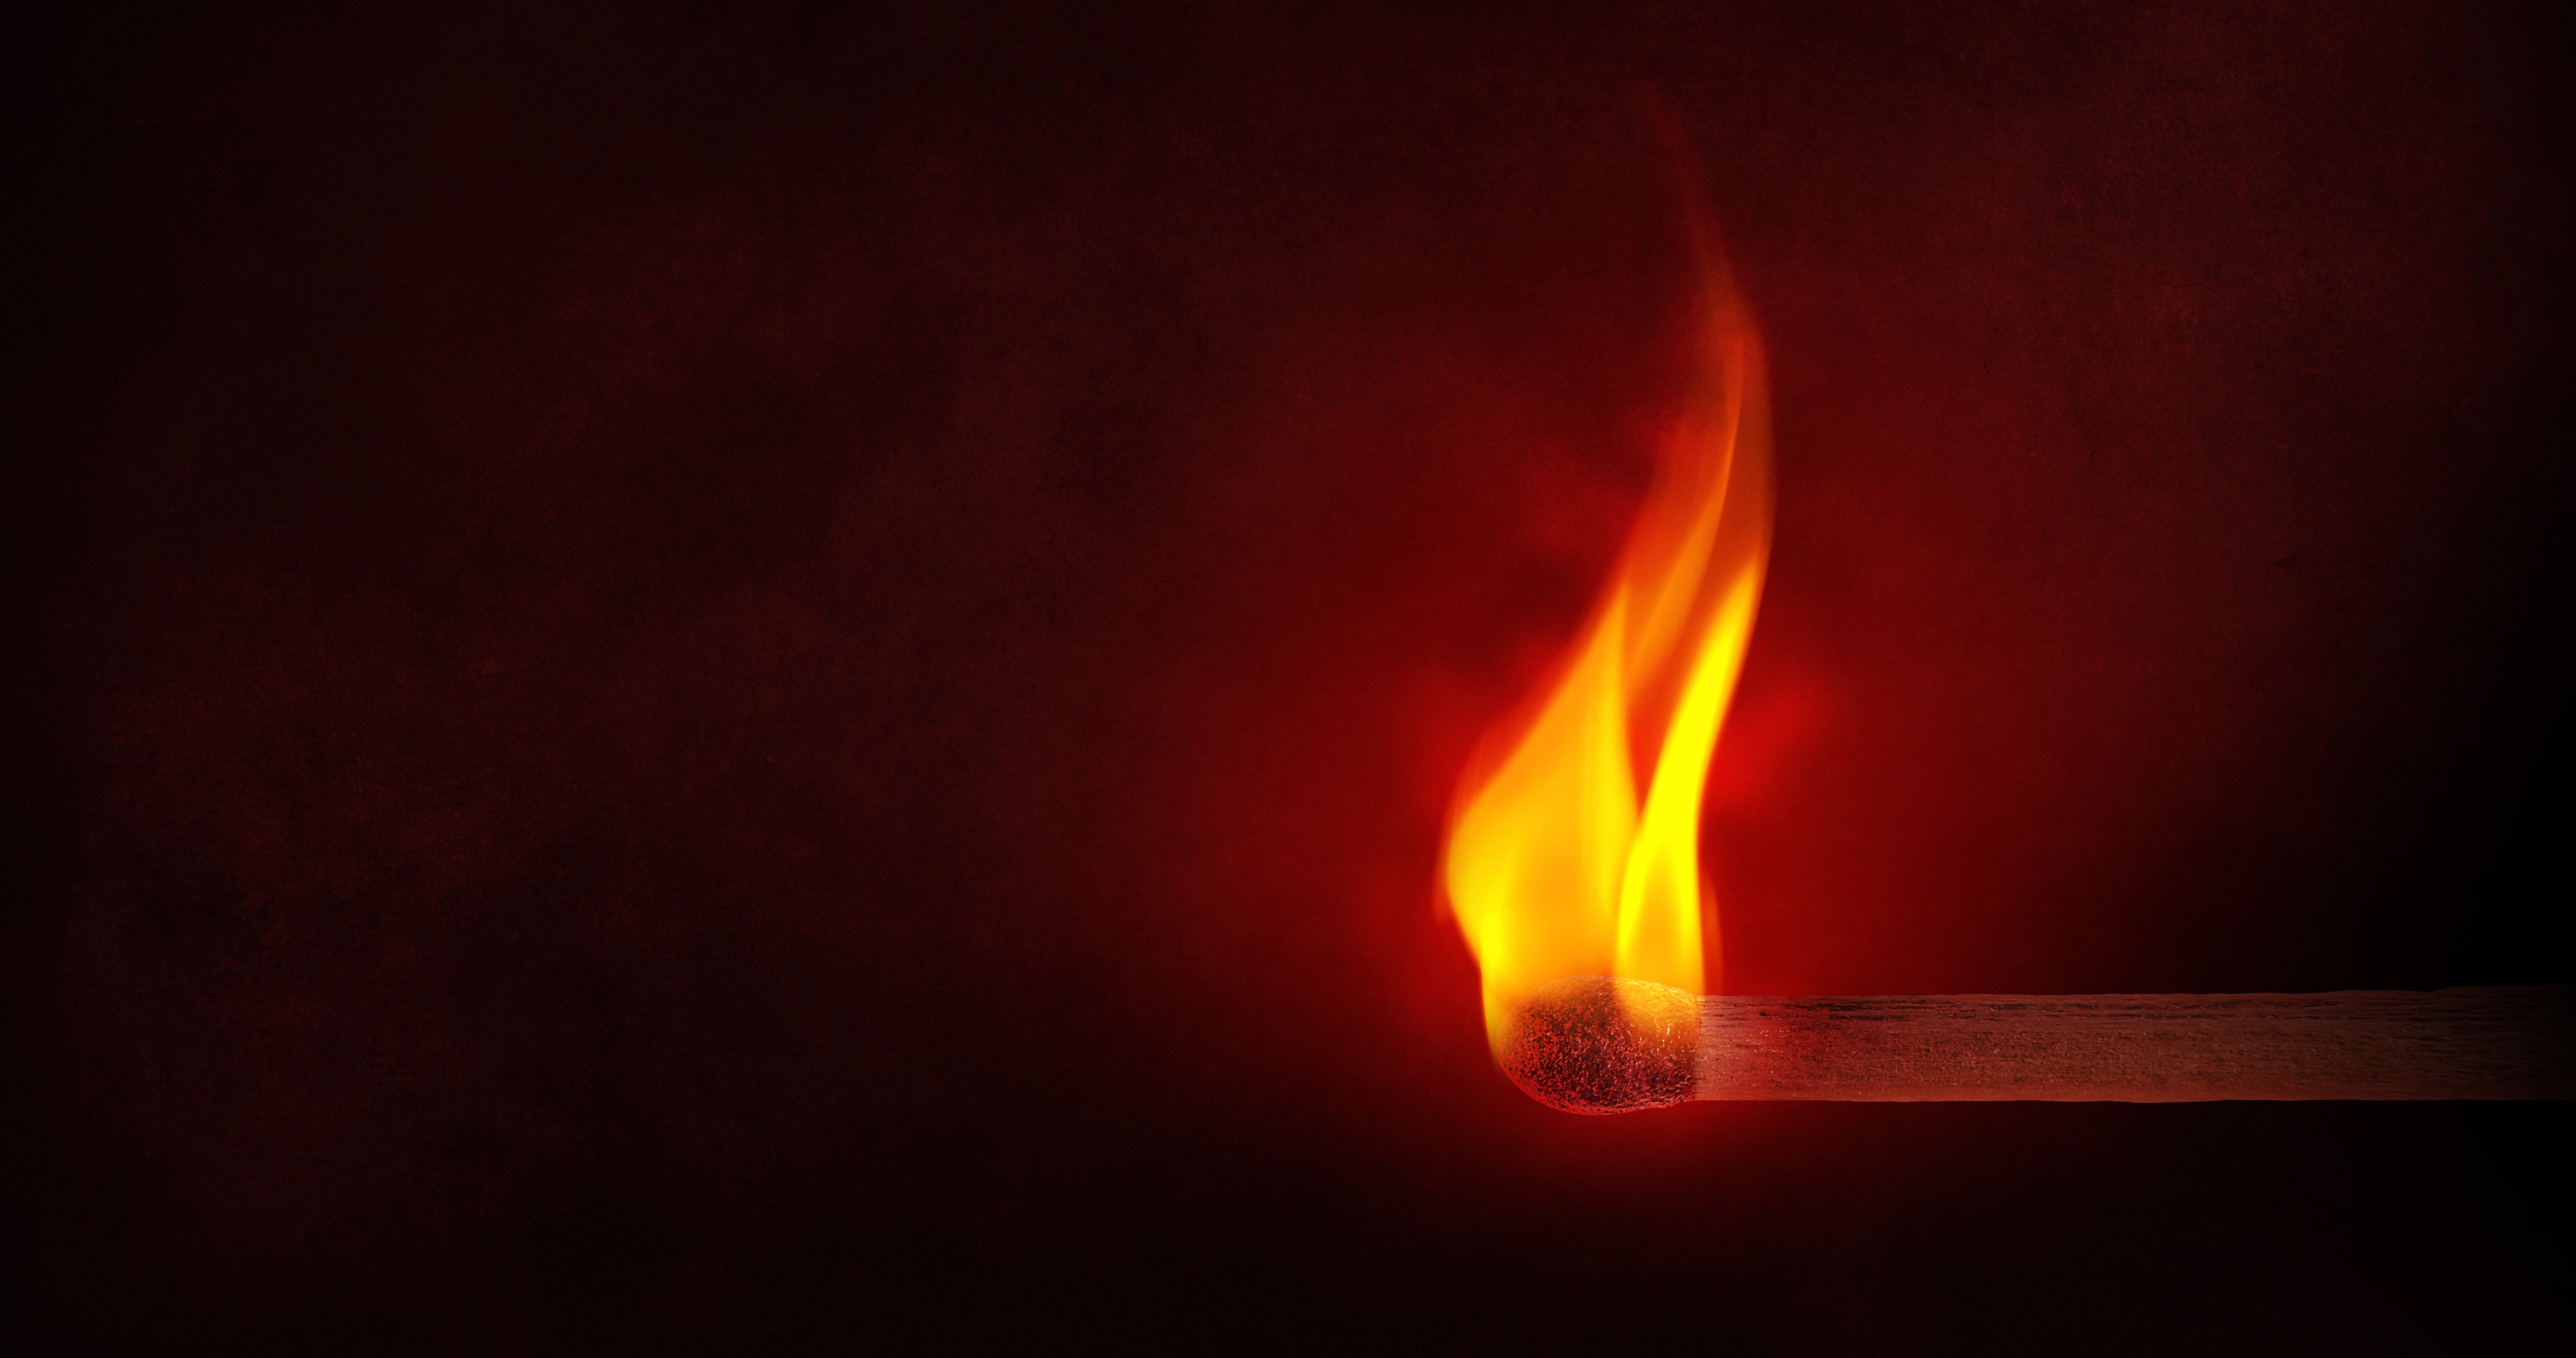 Download wallpapers 4096x2160 match, fire, flame, sulfur hd backgrounds